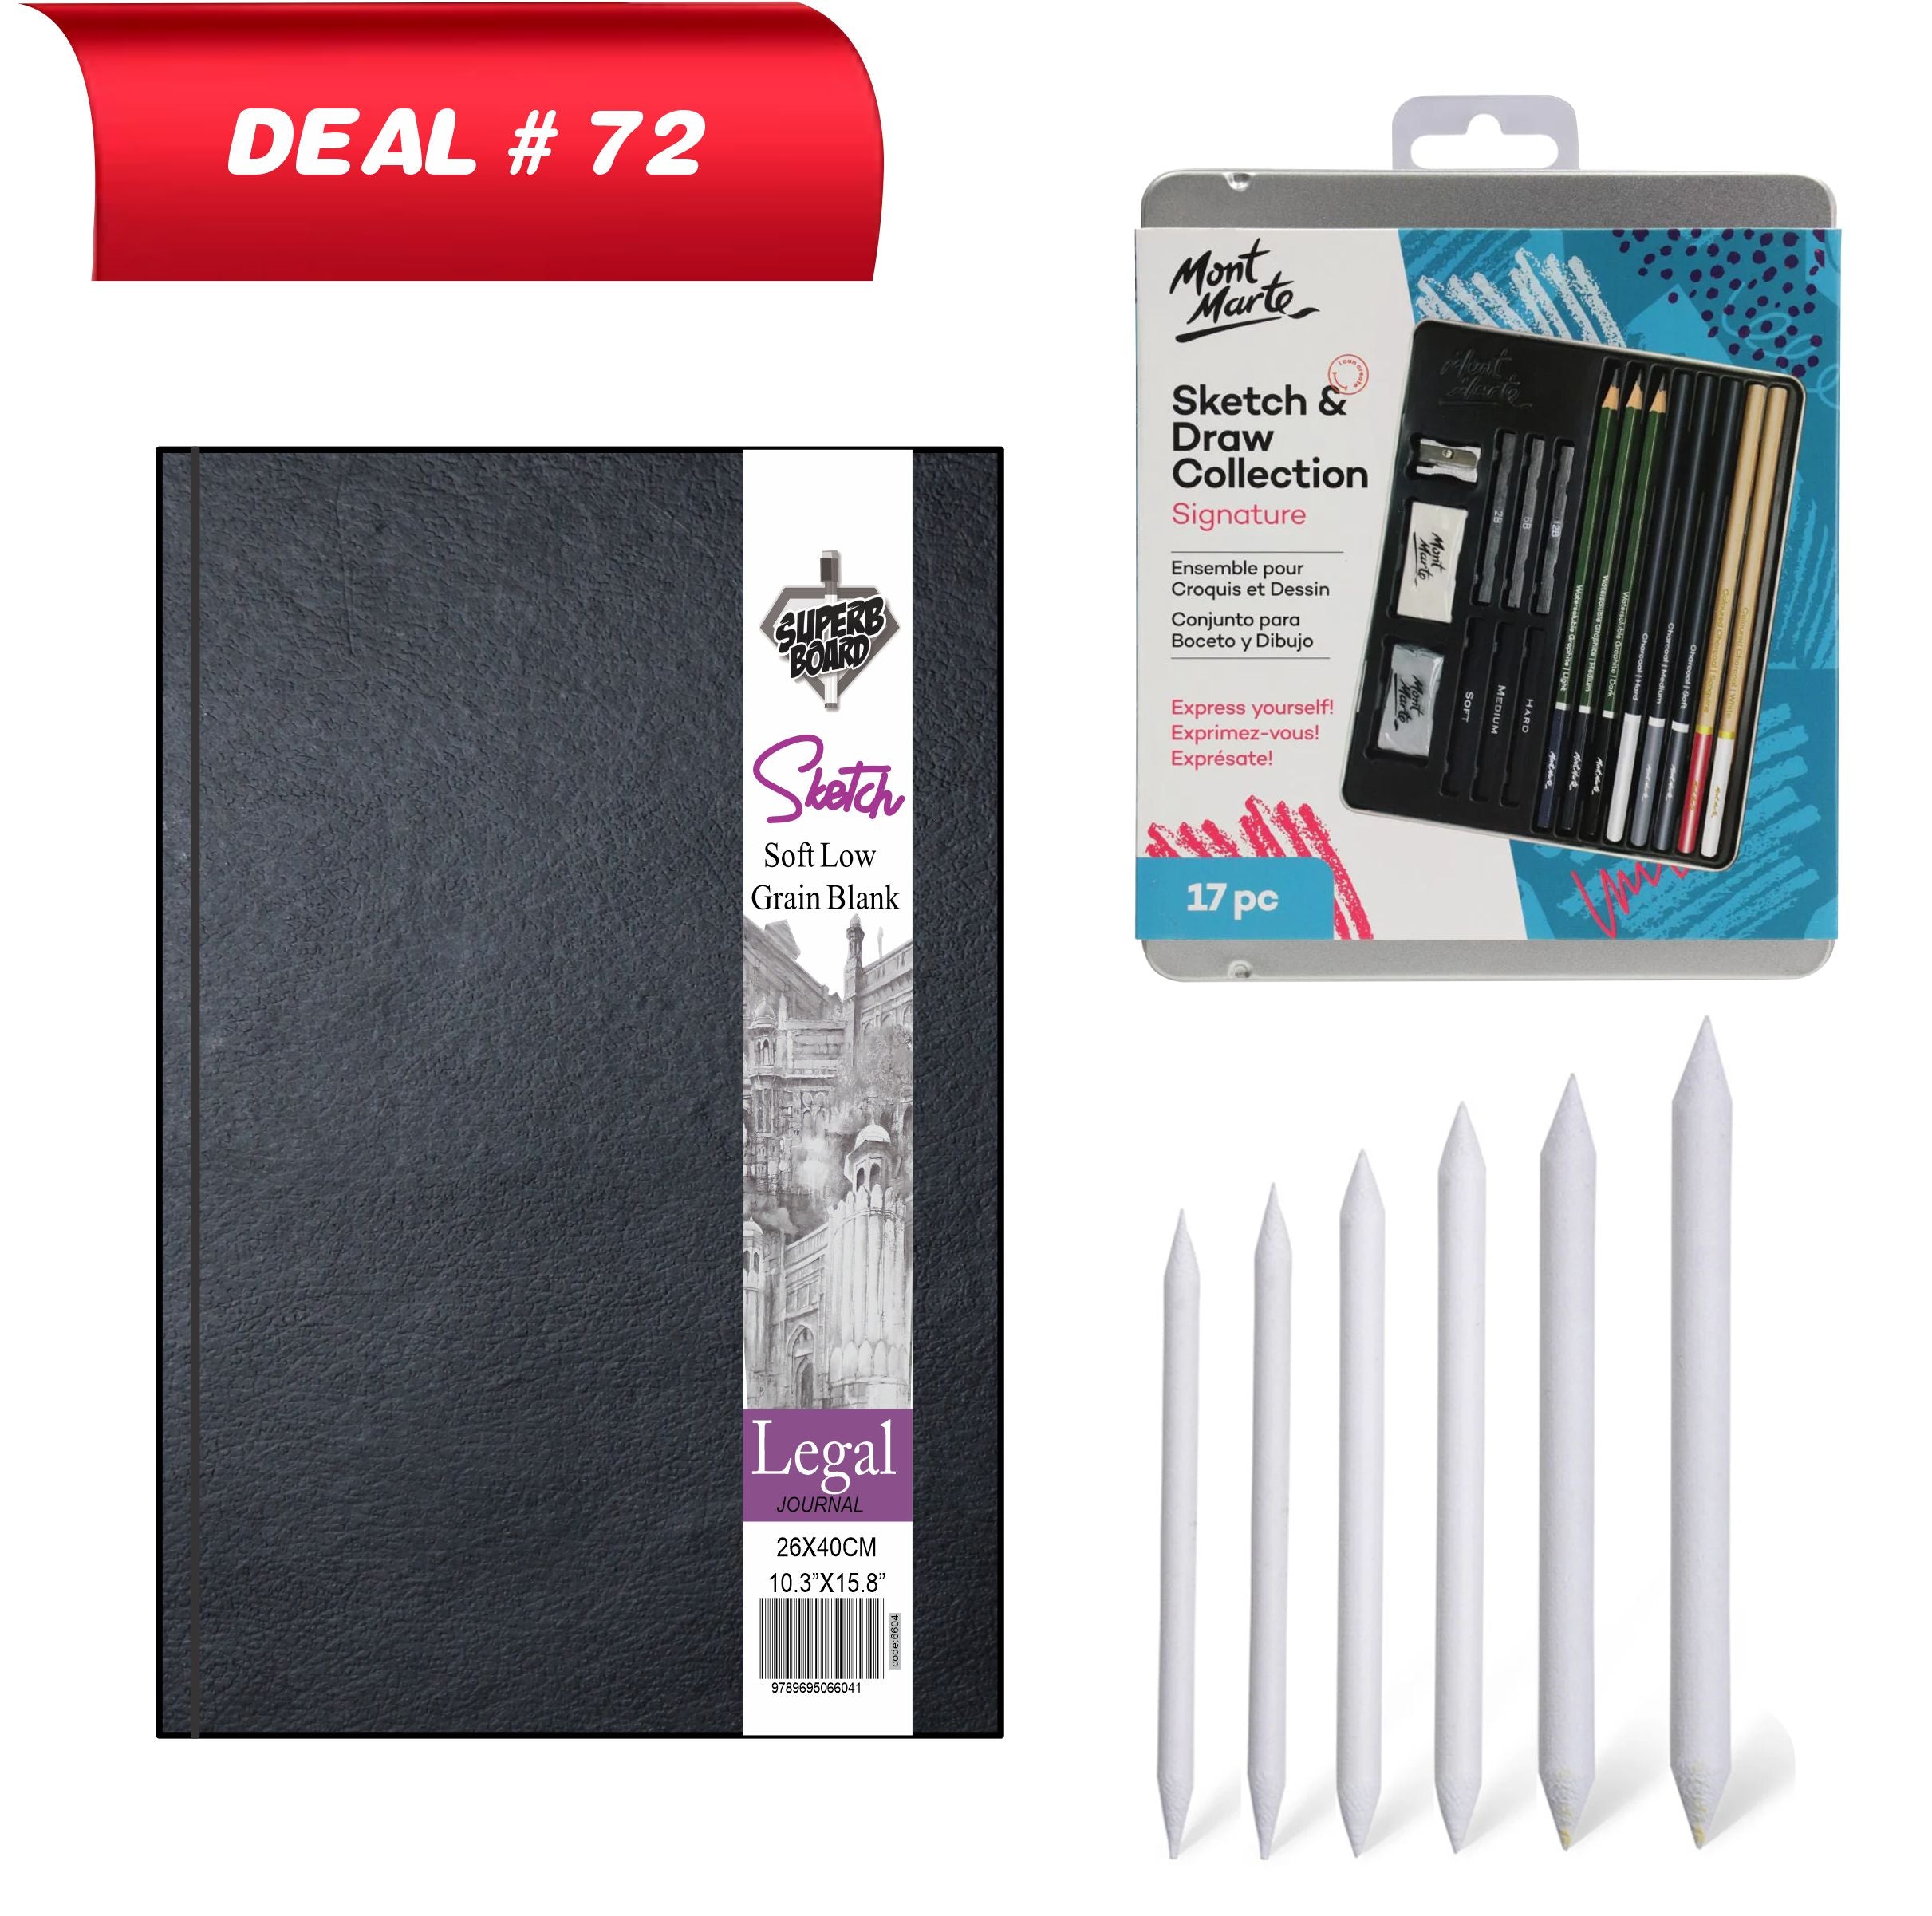 Sketching Kit For Professional Artist, Deal No.72